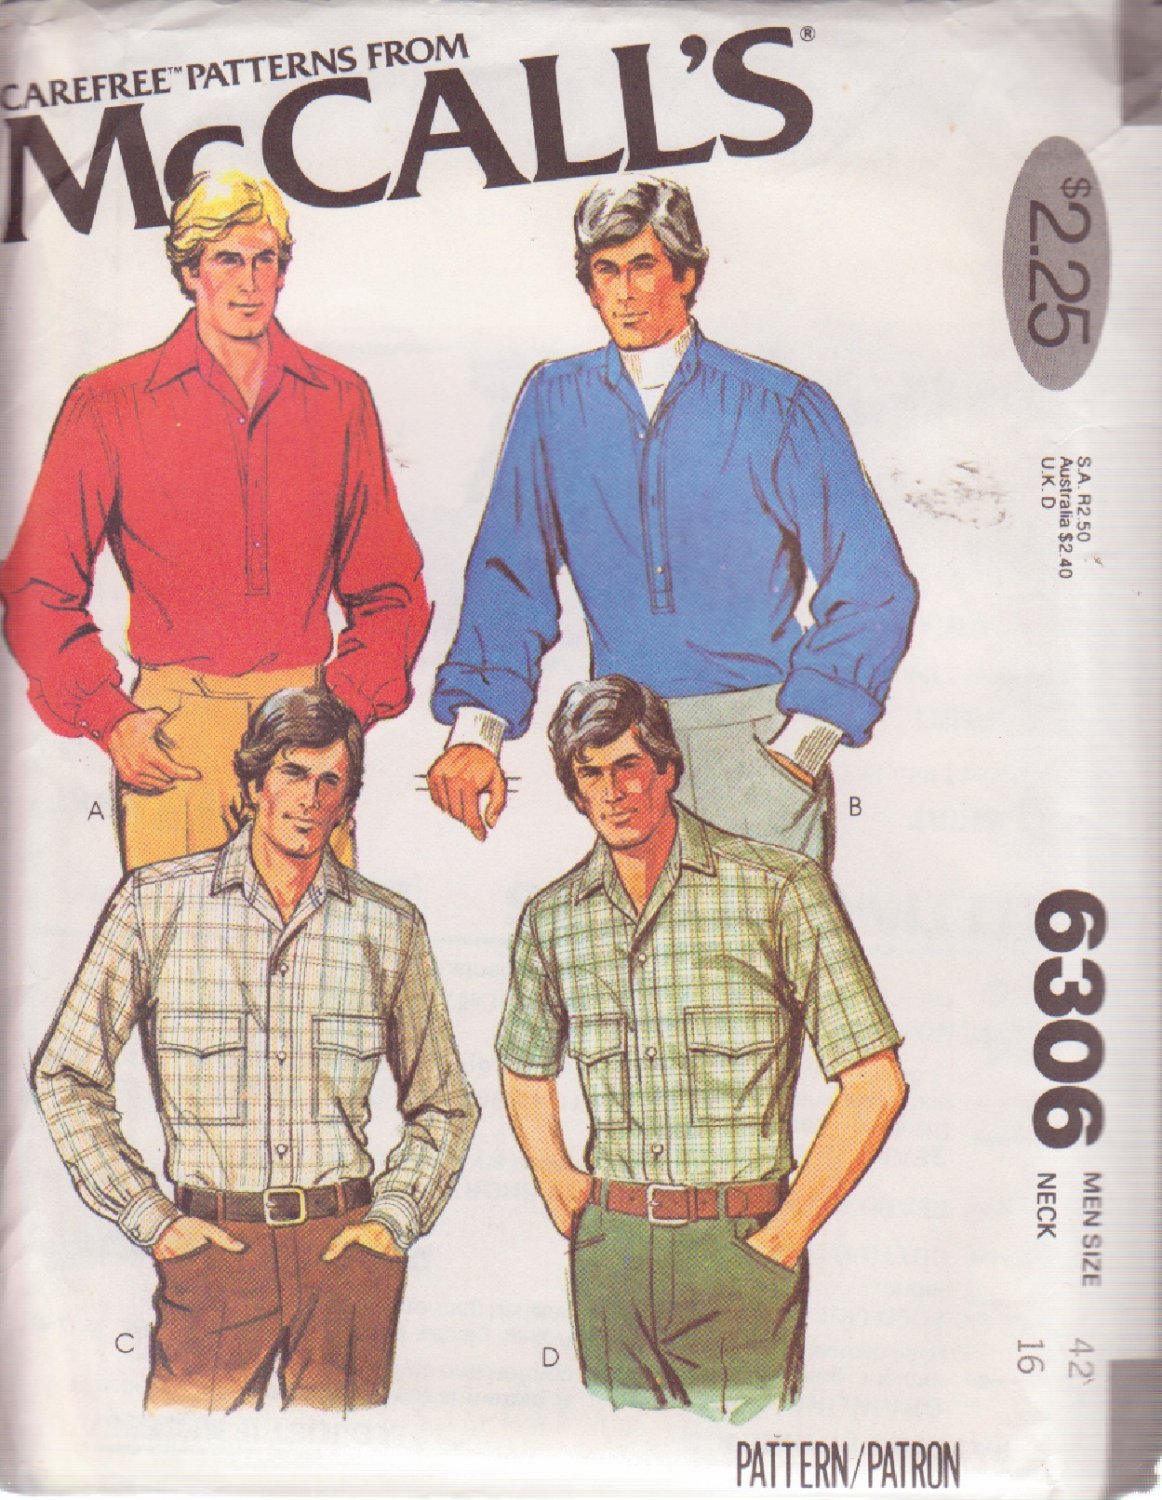 McCALL'S PATTERN 6306 SIZE 42 MEN'S SHIRT IN 4 VARIATIONS UNCUT